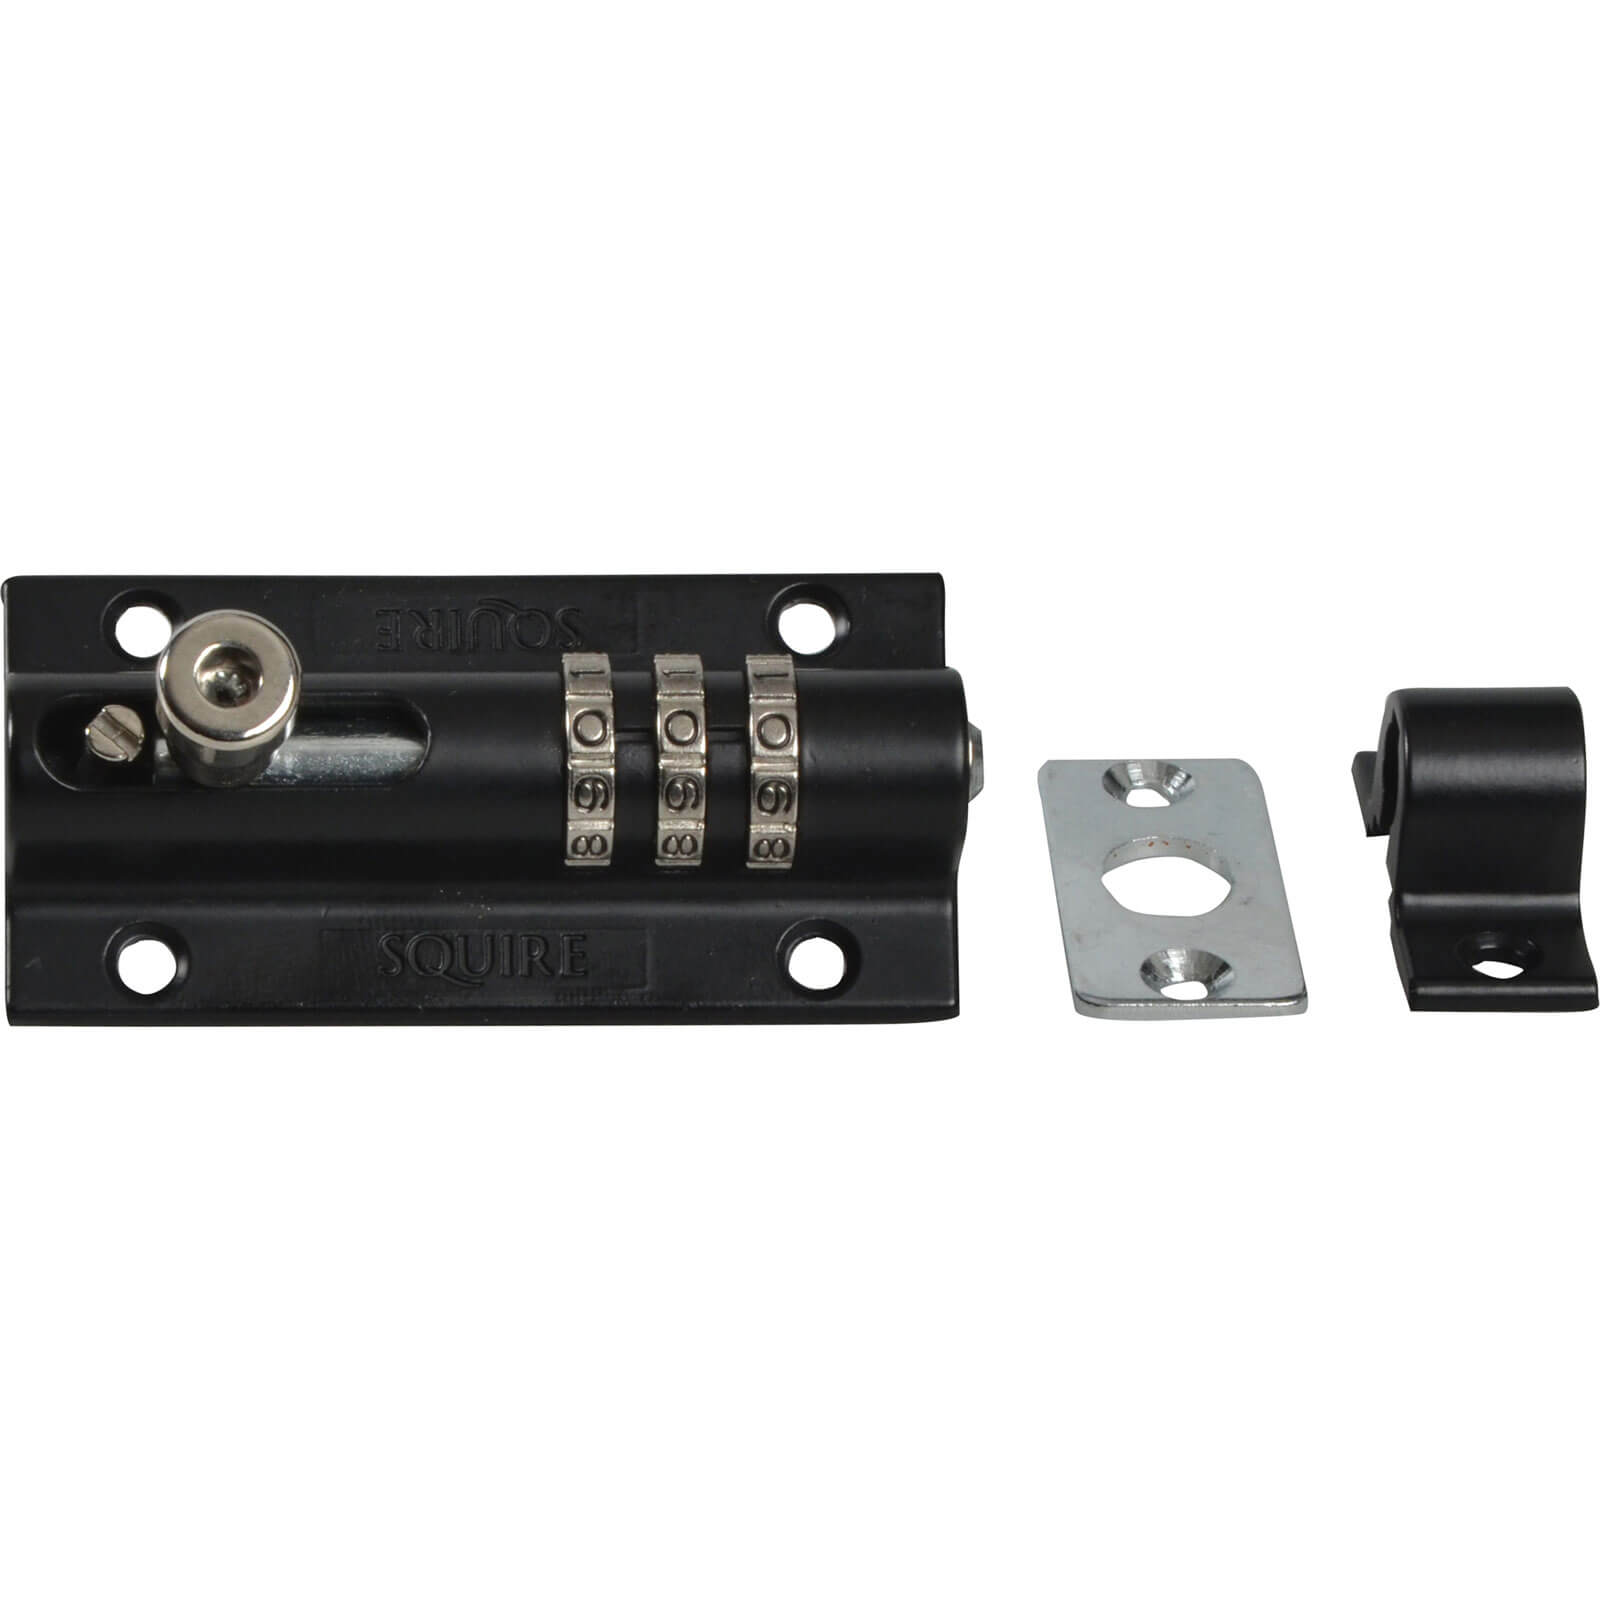 Photo of Henry Squire 3 Wheel Recodeable Combination Bolt Lock Black